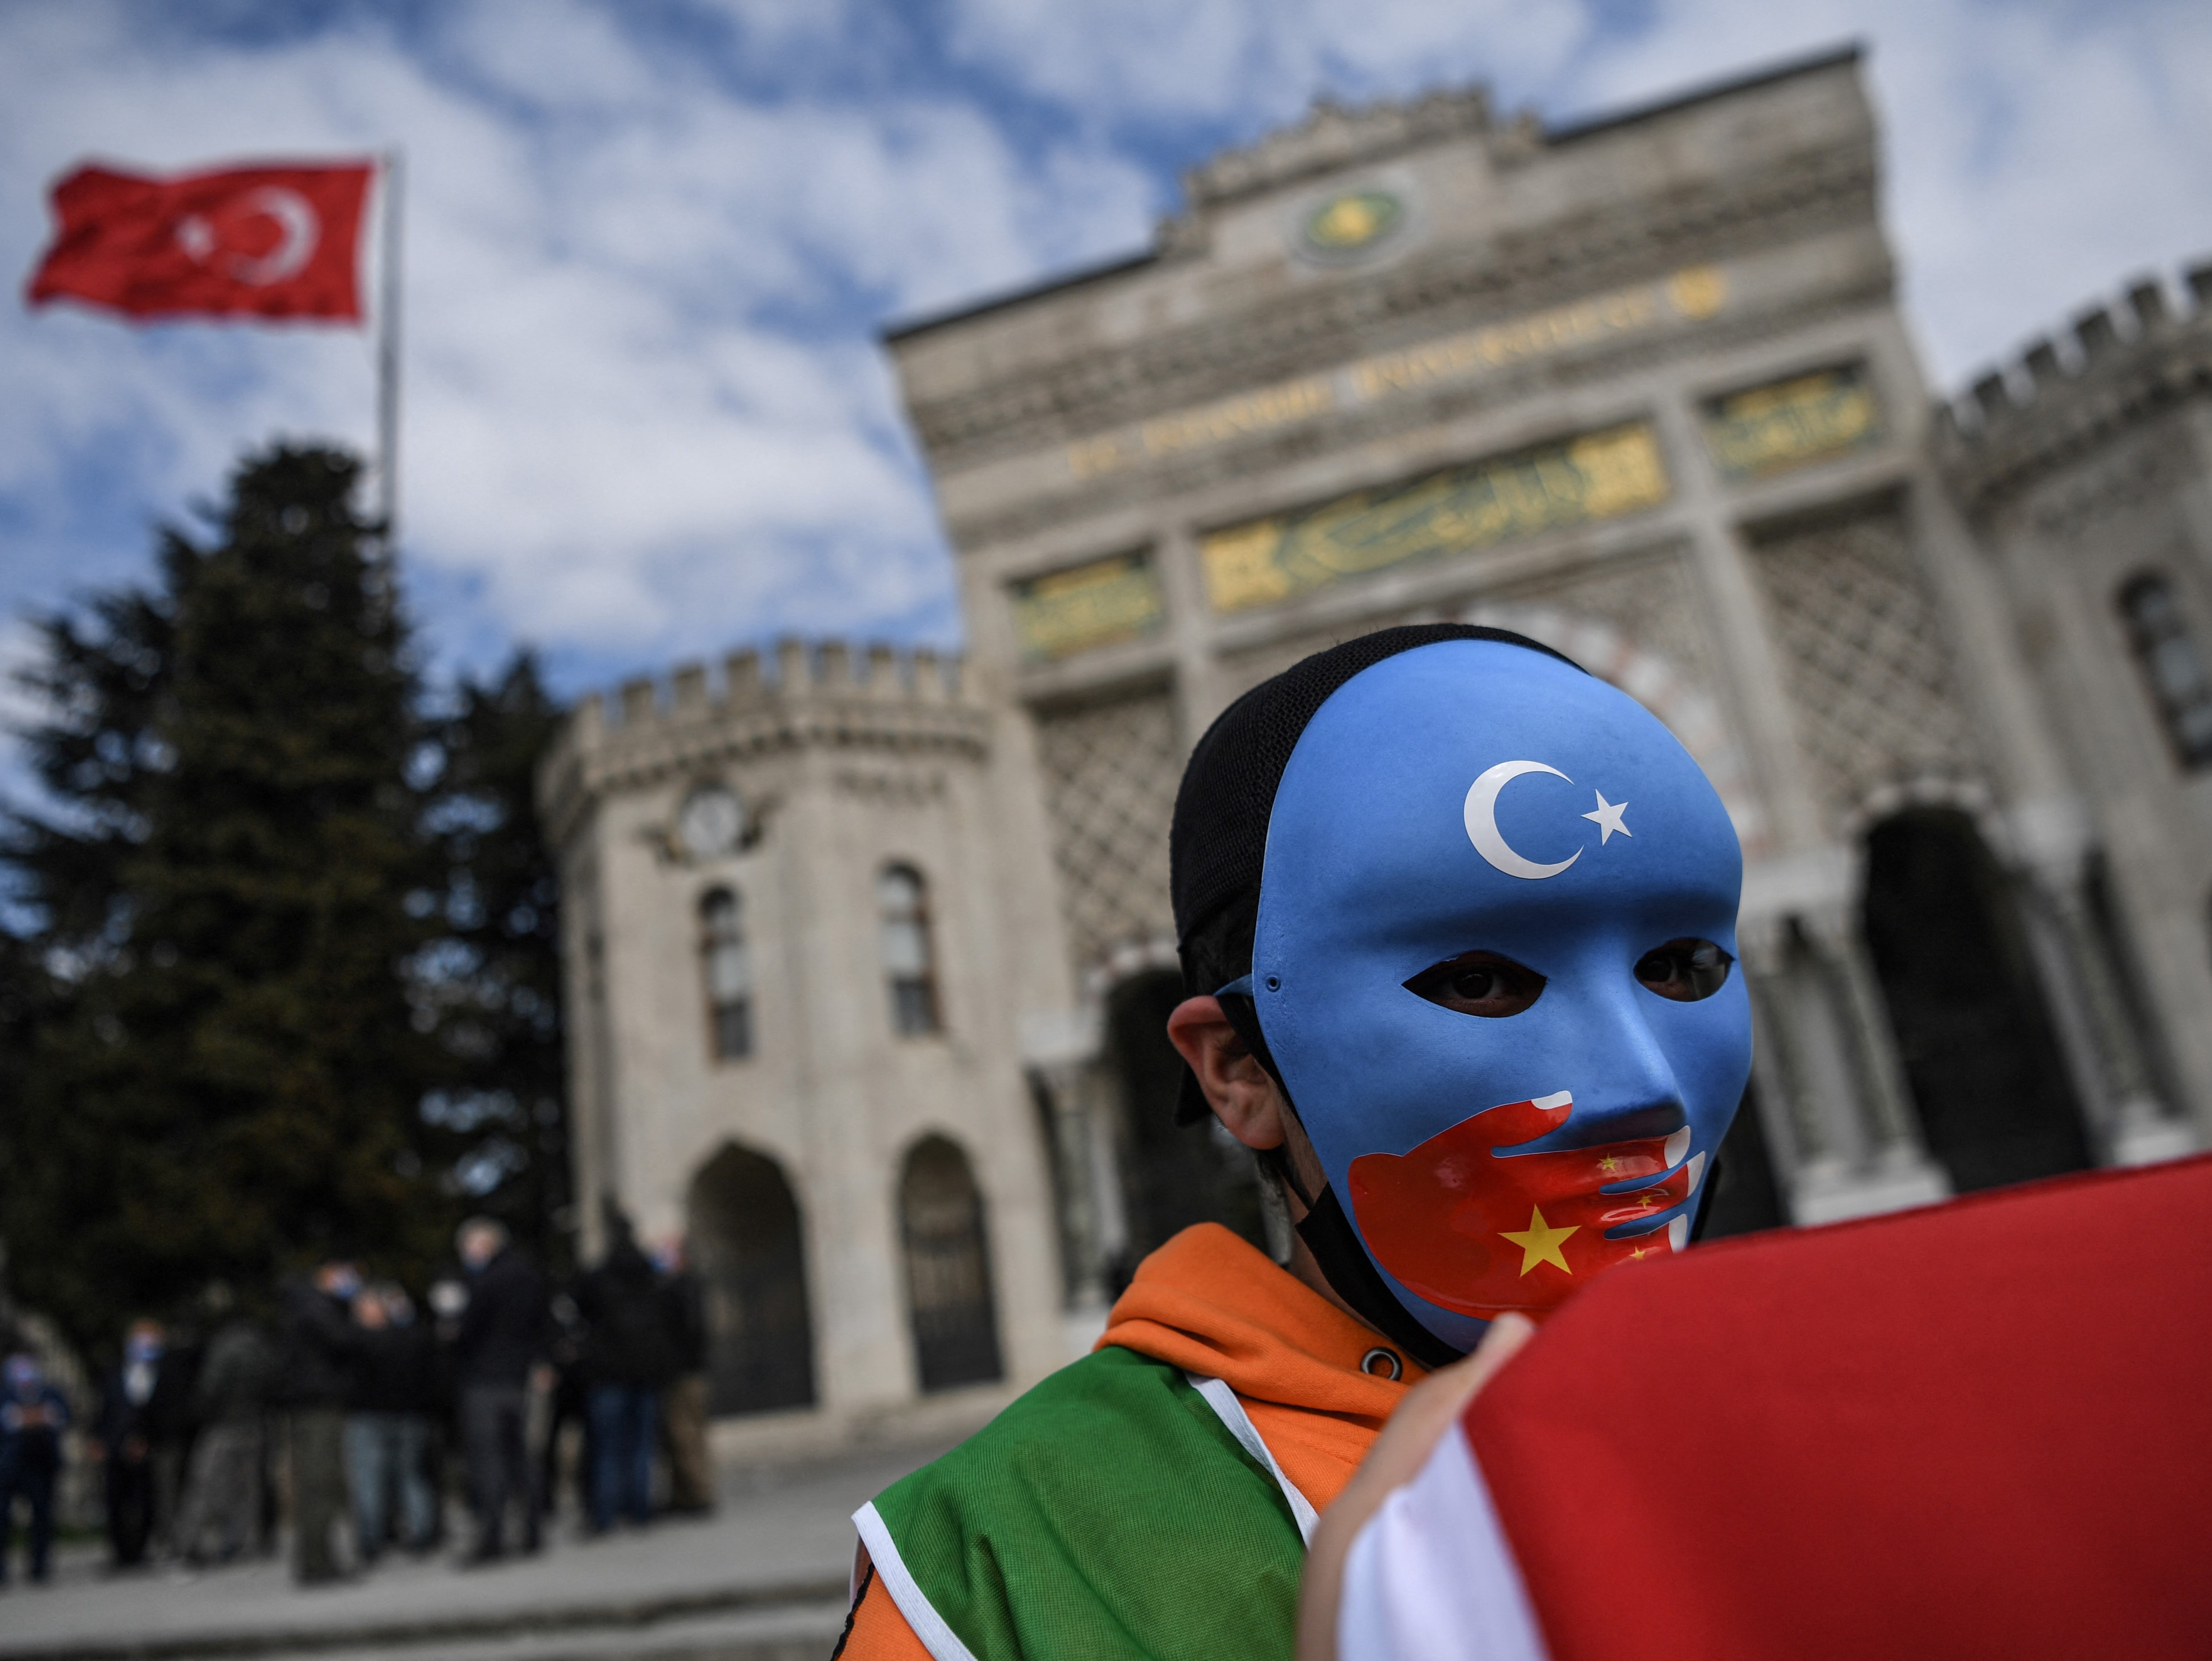 A protest in Turkey against alleged forced birth control measures in Xinjiang, China